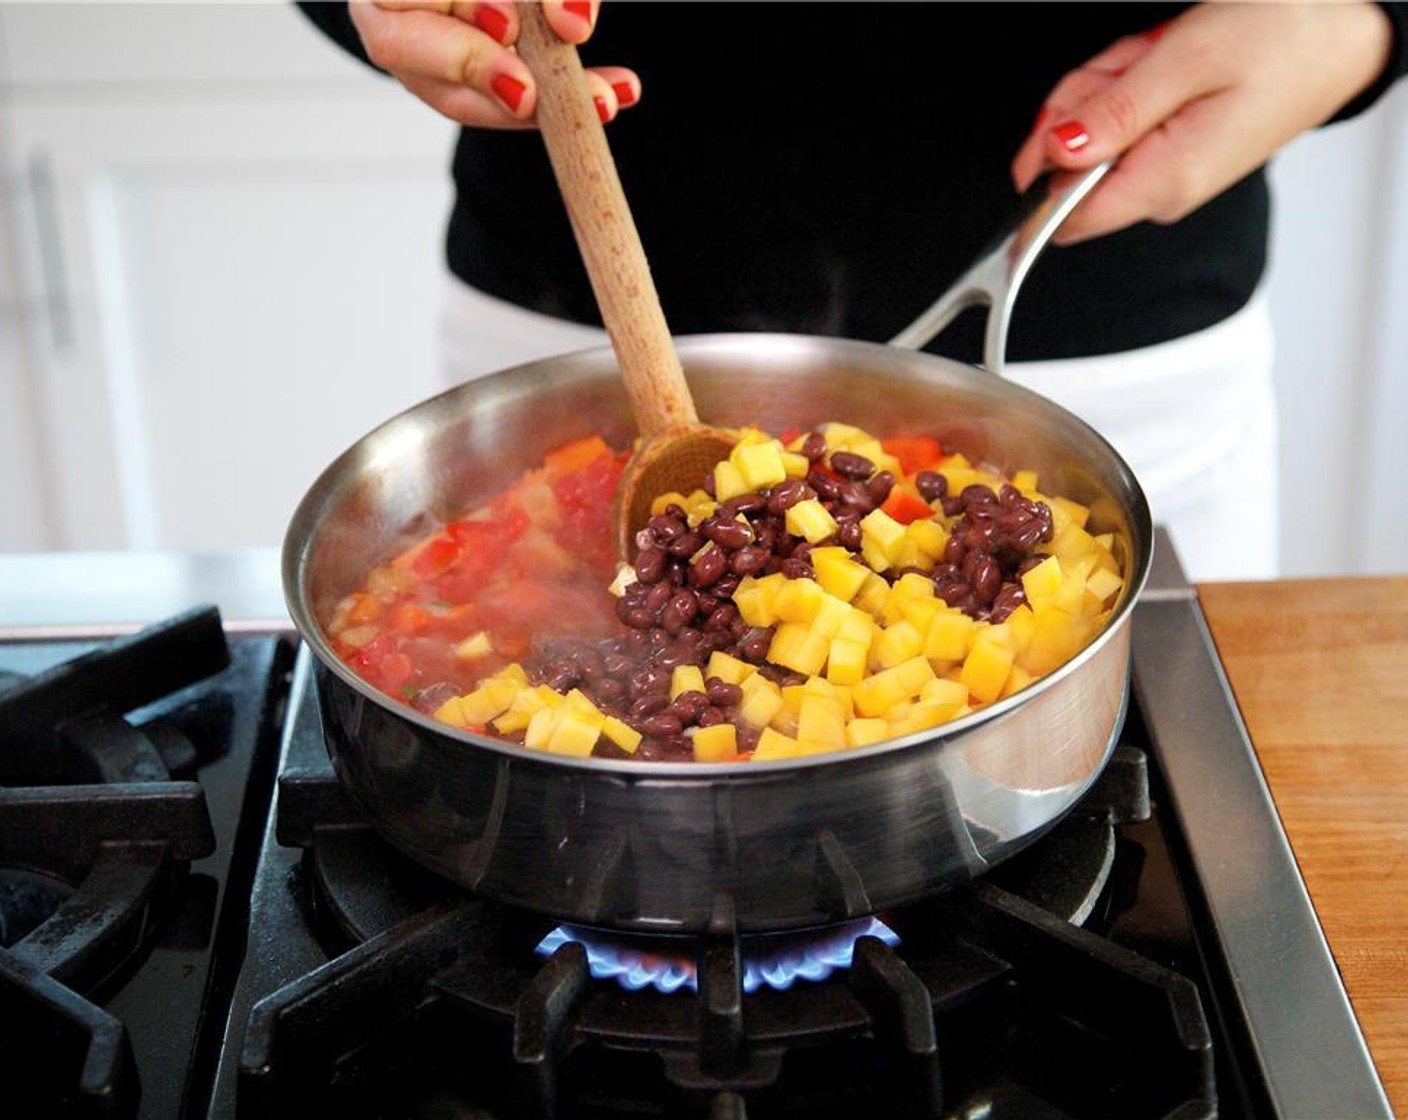 step 6 Stir in the Black Beans (1 can) and continue to simmer gently for 5 minutes.